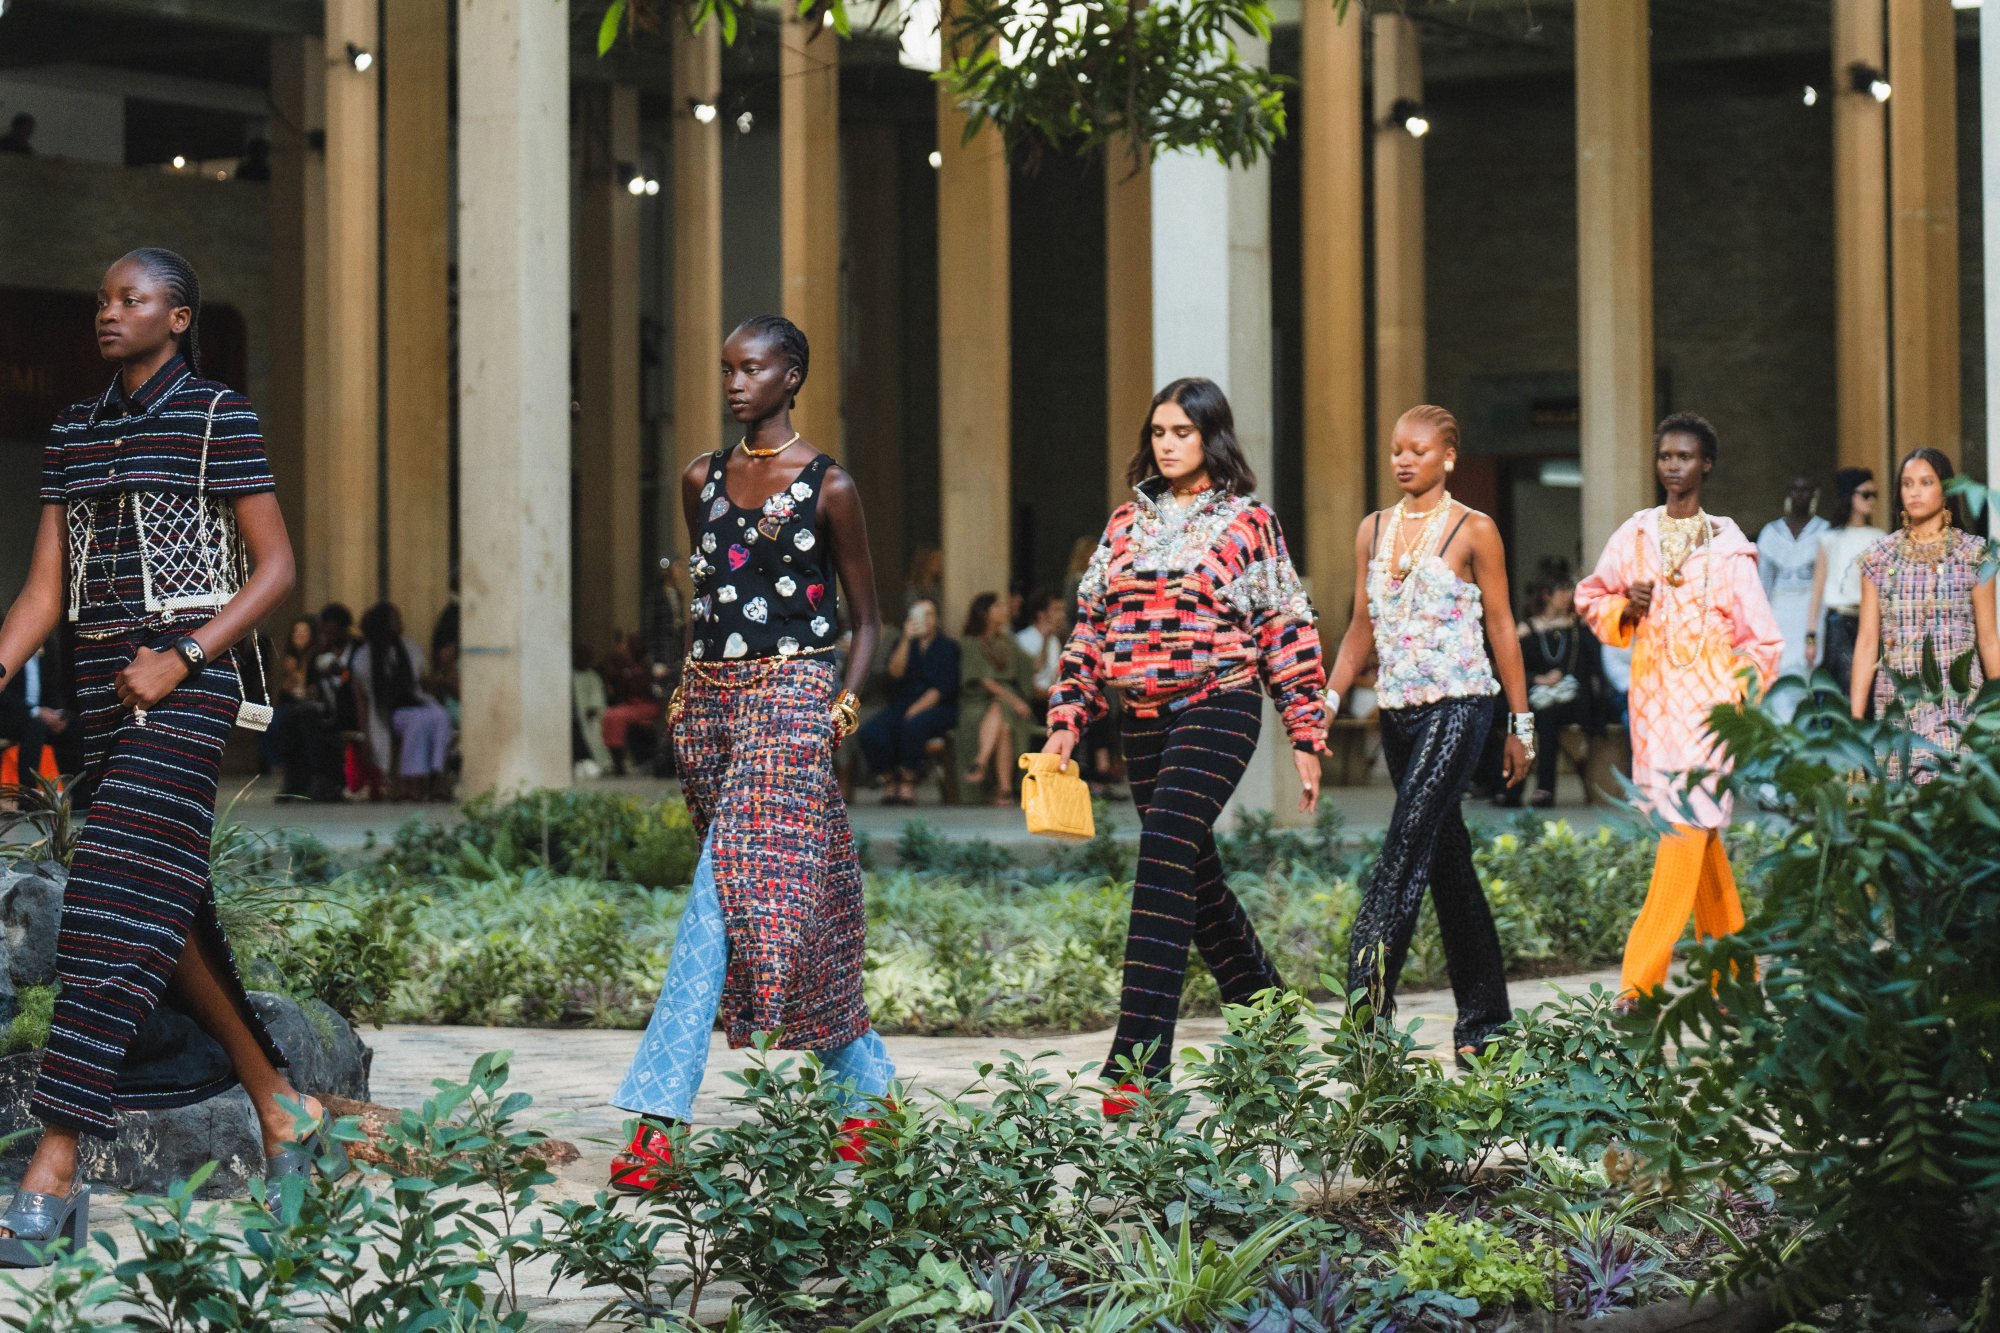 How to rock flamboyant fashion inspired by Chanel's dazzling Dakar show – 5  colour-pop styles channeling bright African vibes from European houses  including Louis Vuitton, Loewe and Roger Vivier